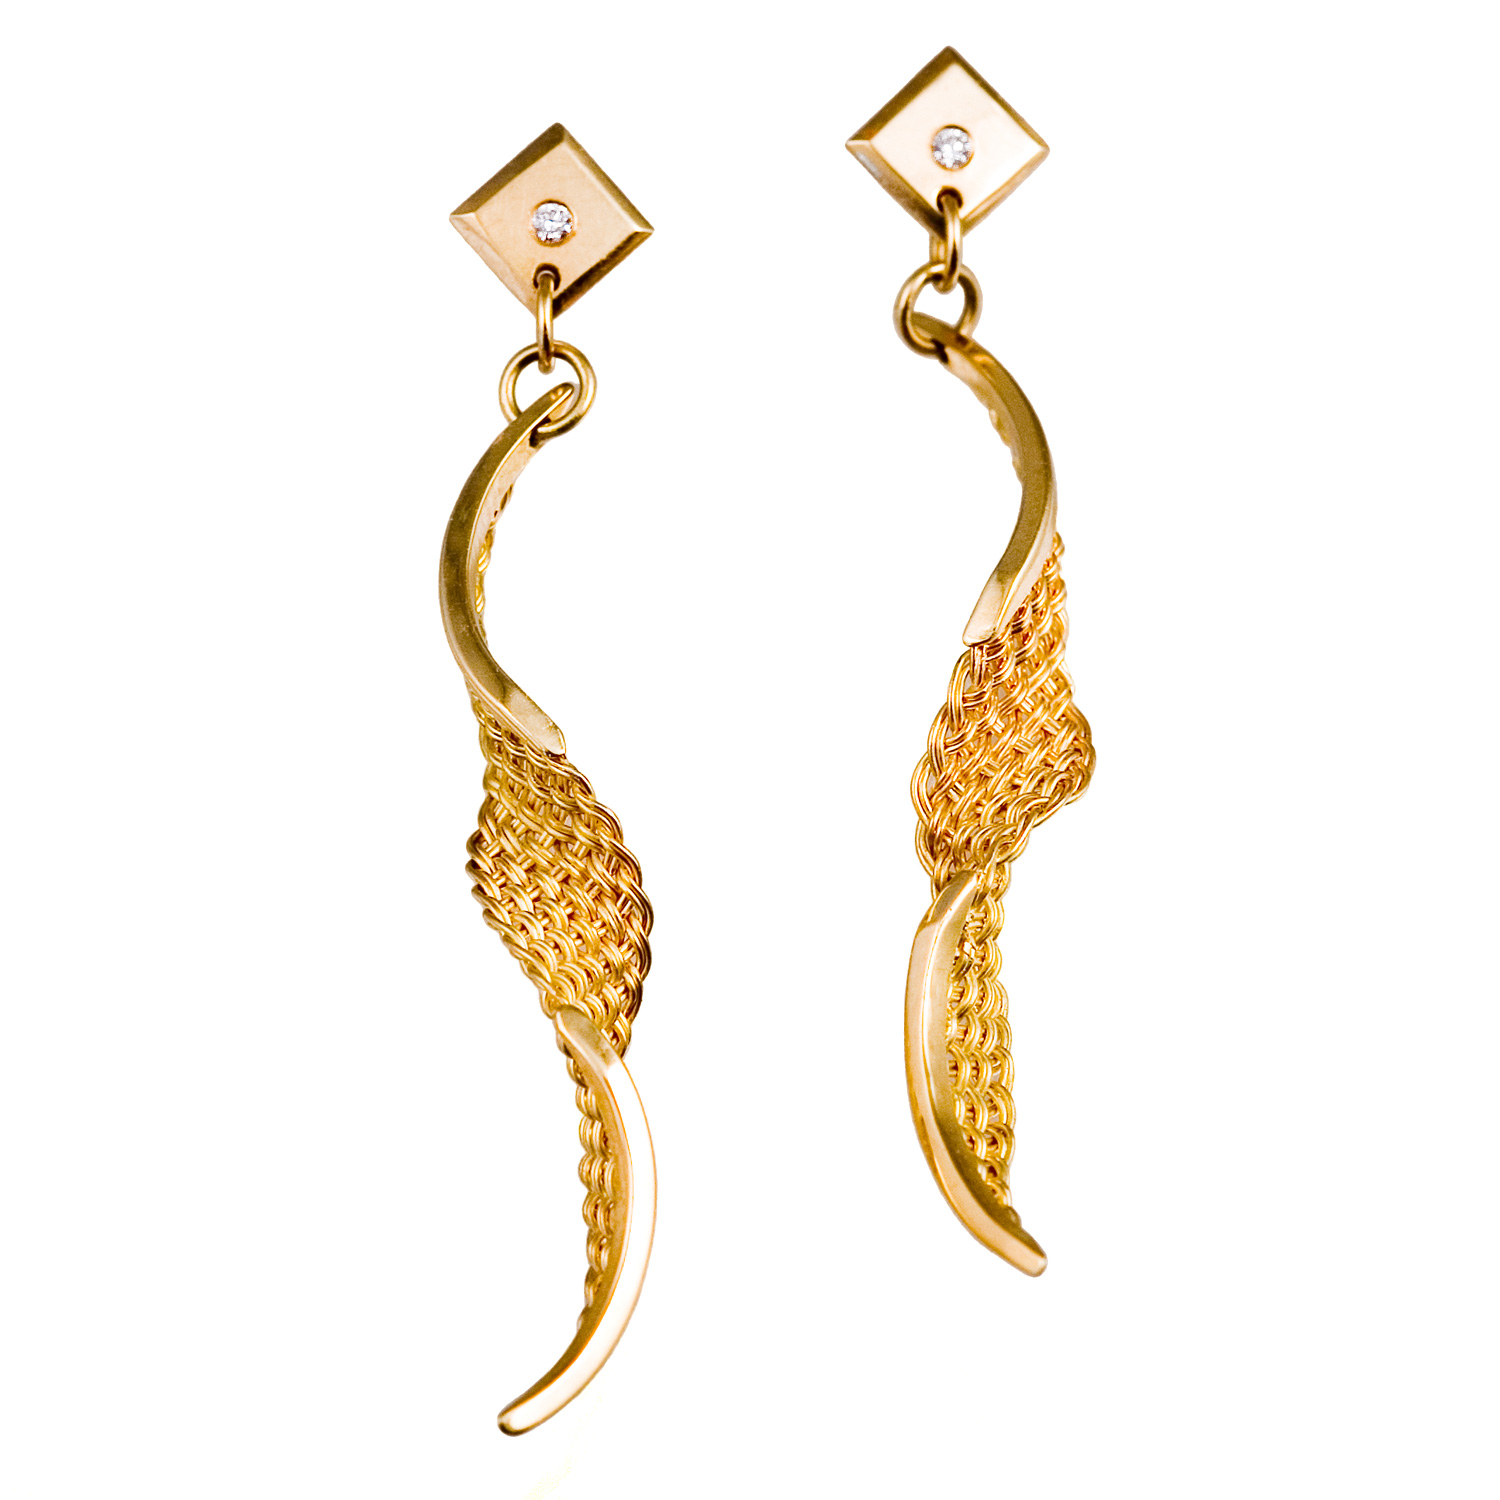 Spiral Twist Weave Earrings in 18k gold with diamonds by Tamberlaine